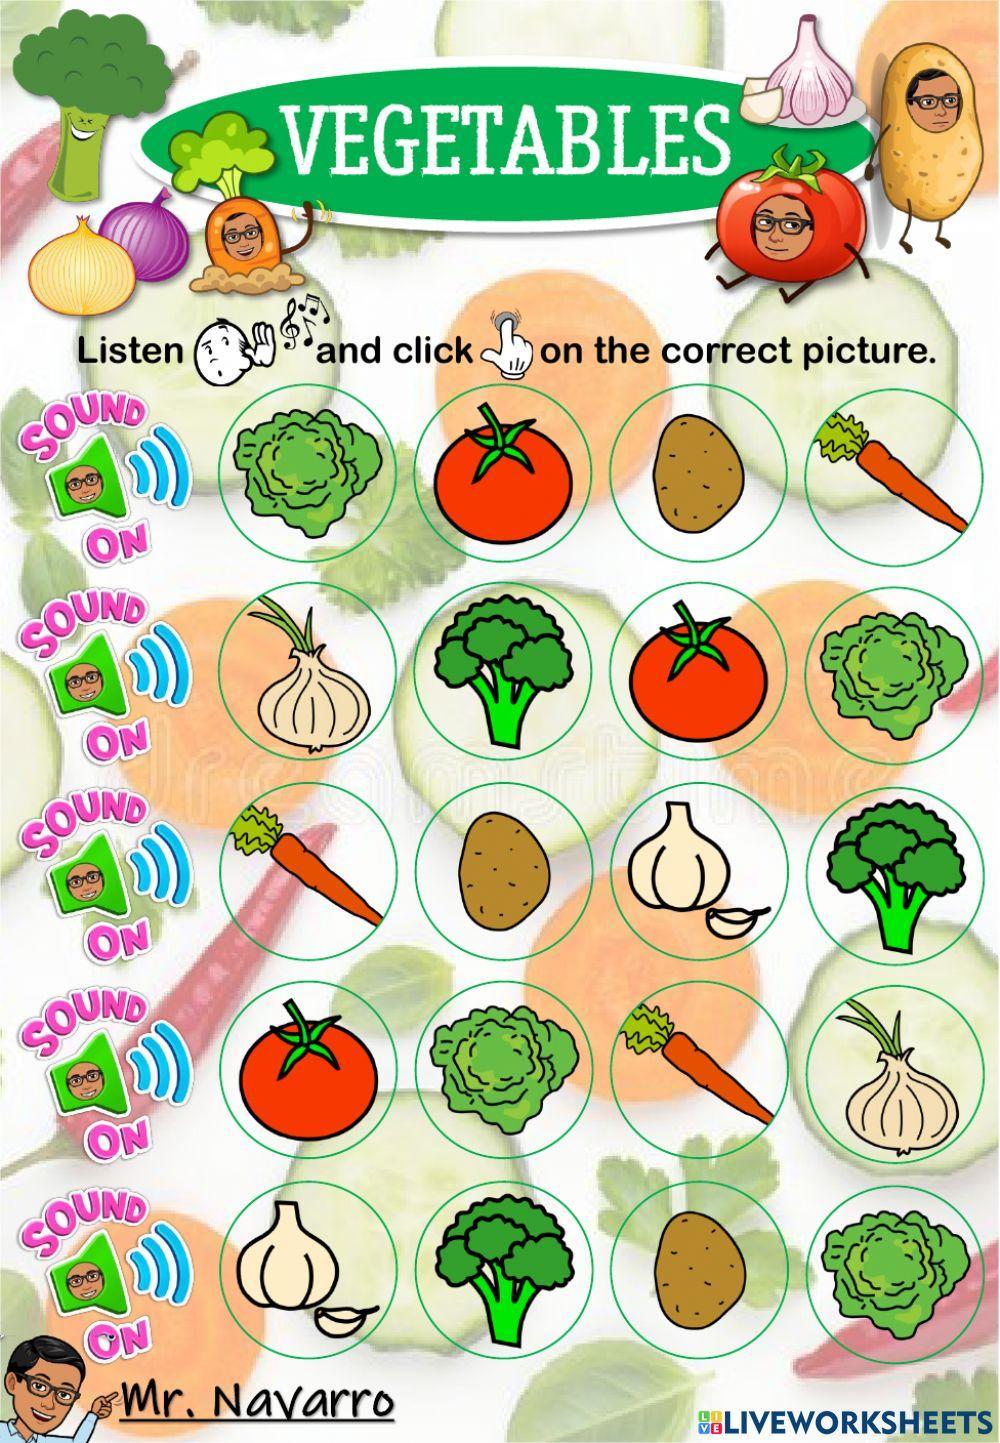 Vegetables (Listen and click)